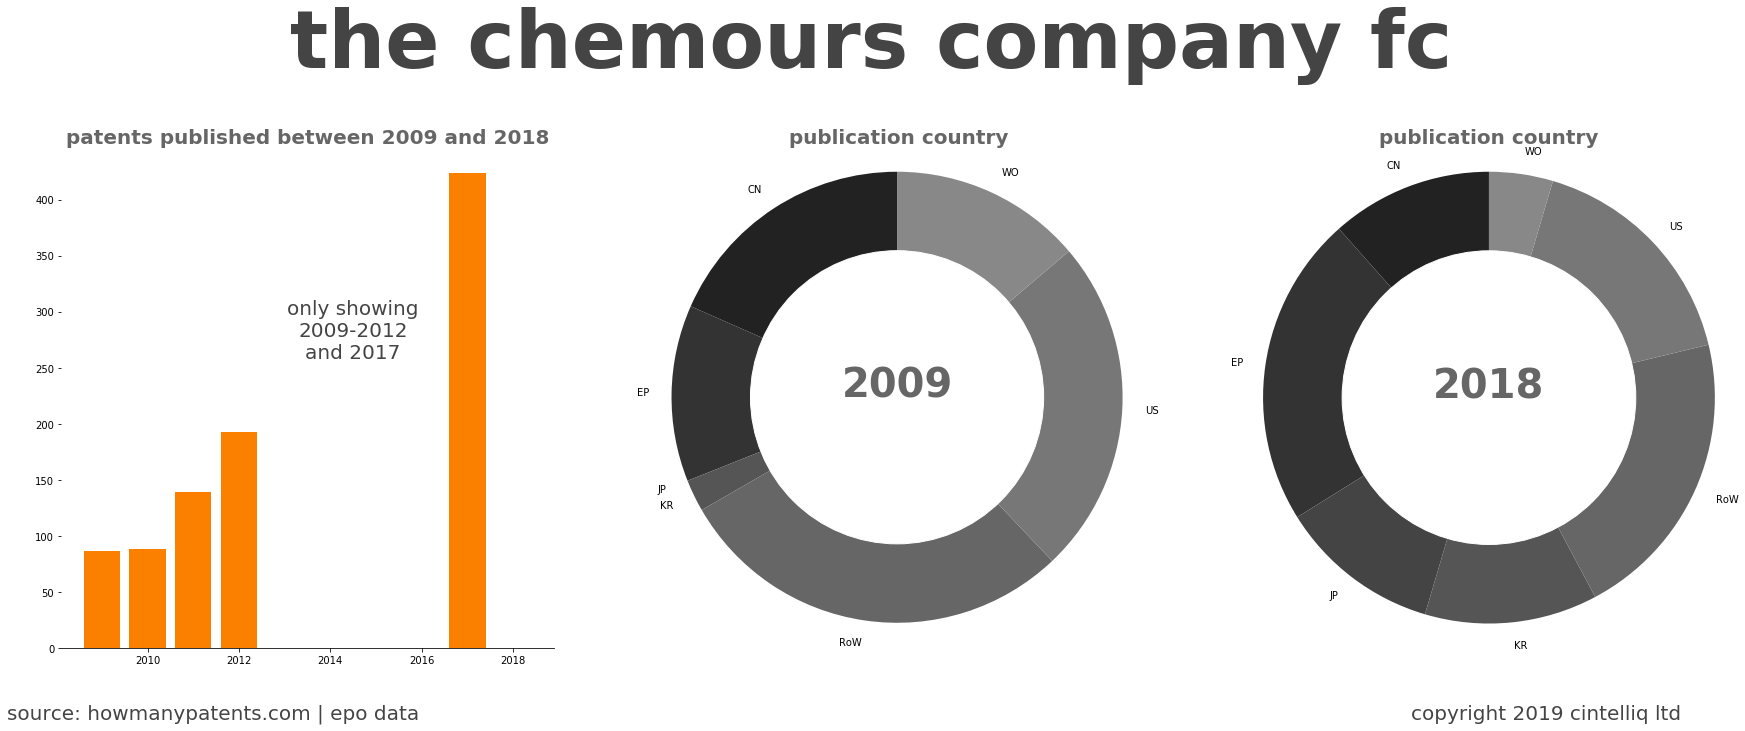 summary of patents for The Chemours Company Fc